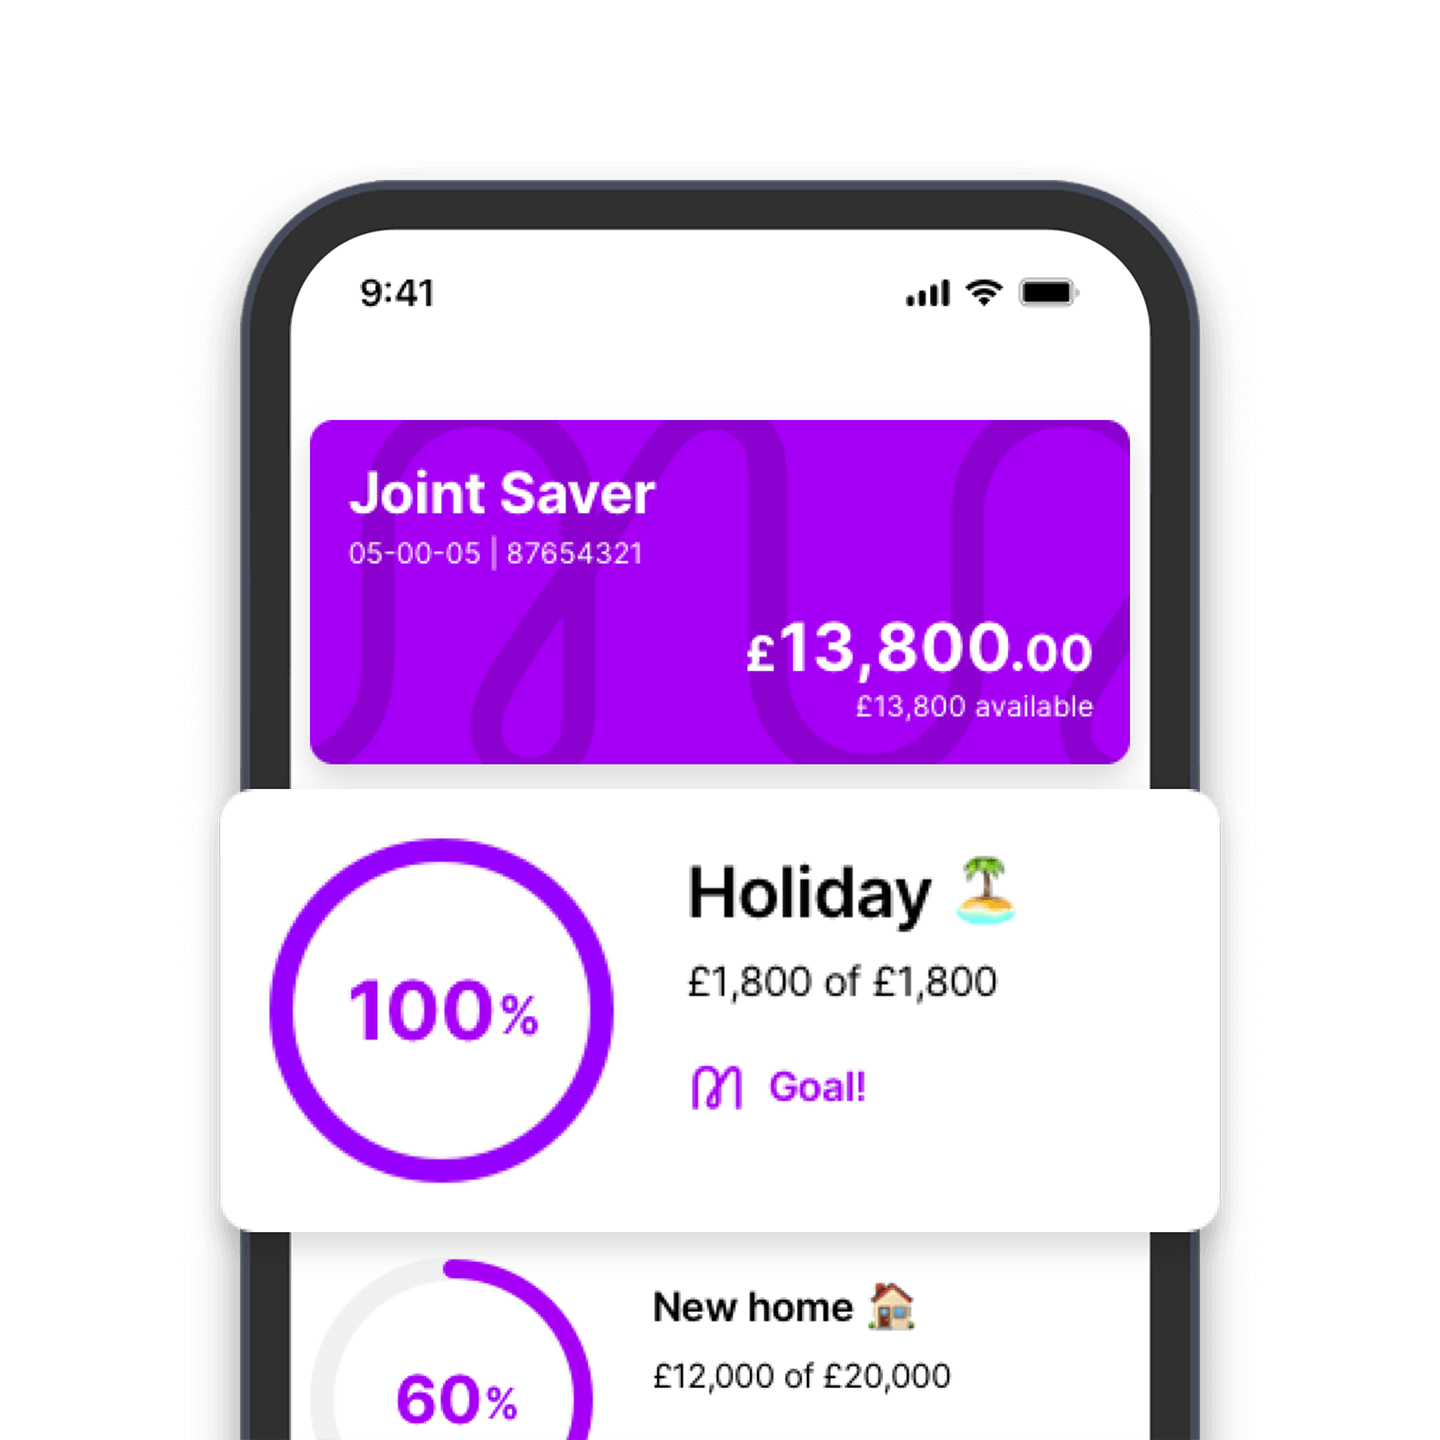 A phone with a rectangular tile which shows a Joint Saver account with a balance of £13,800, and another tile showing Holiday - £1,800 of £1,800 and the word "Goal!", then a third tile saying "New home" £12,000 of £12,000